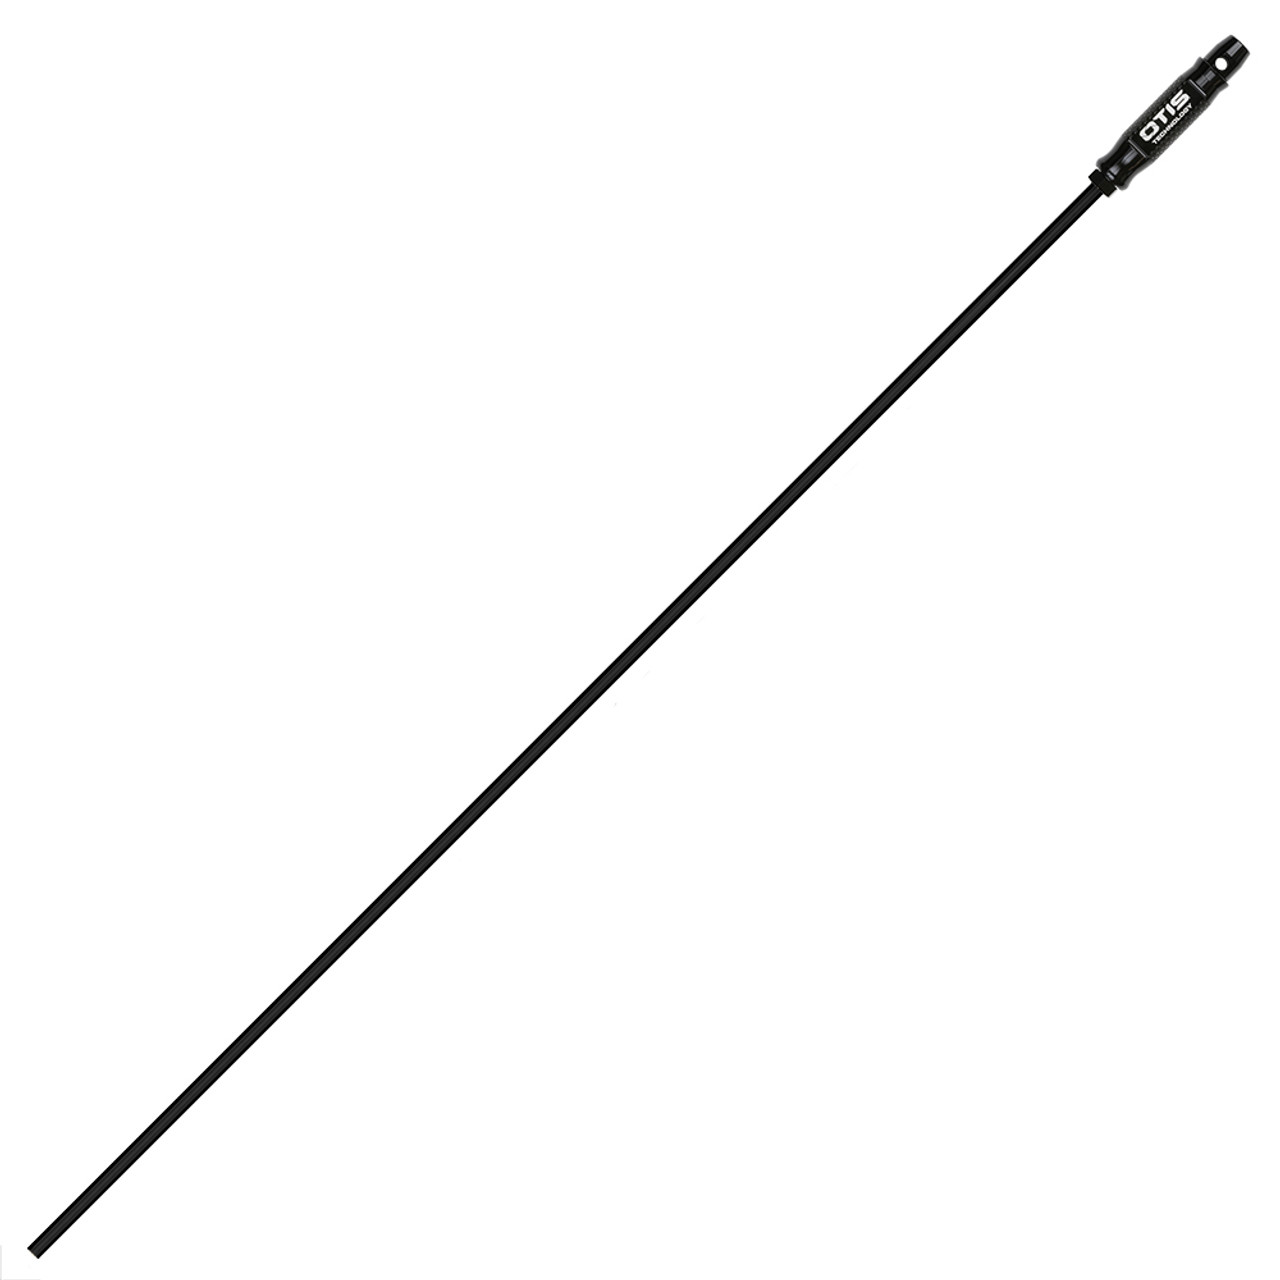 OTIS - SHOTGUN CLEANING ROD 1-PIECE COATED STAINLESS STEEL WITH ROTATING/FIXED HANDLE 36”